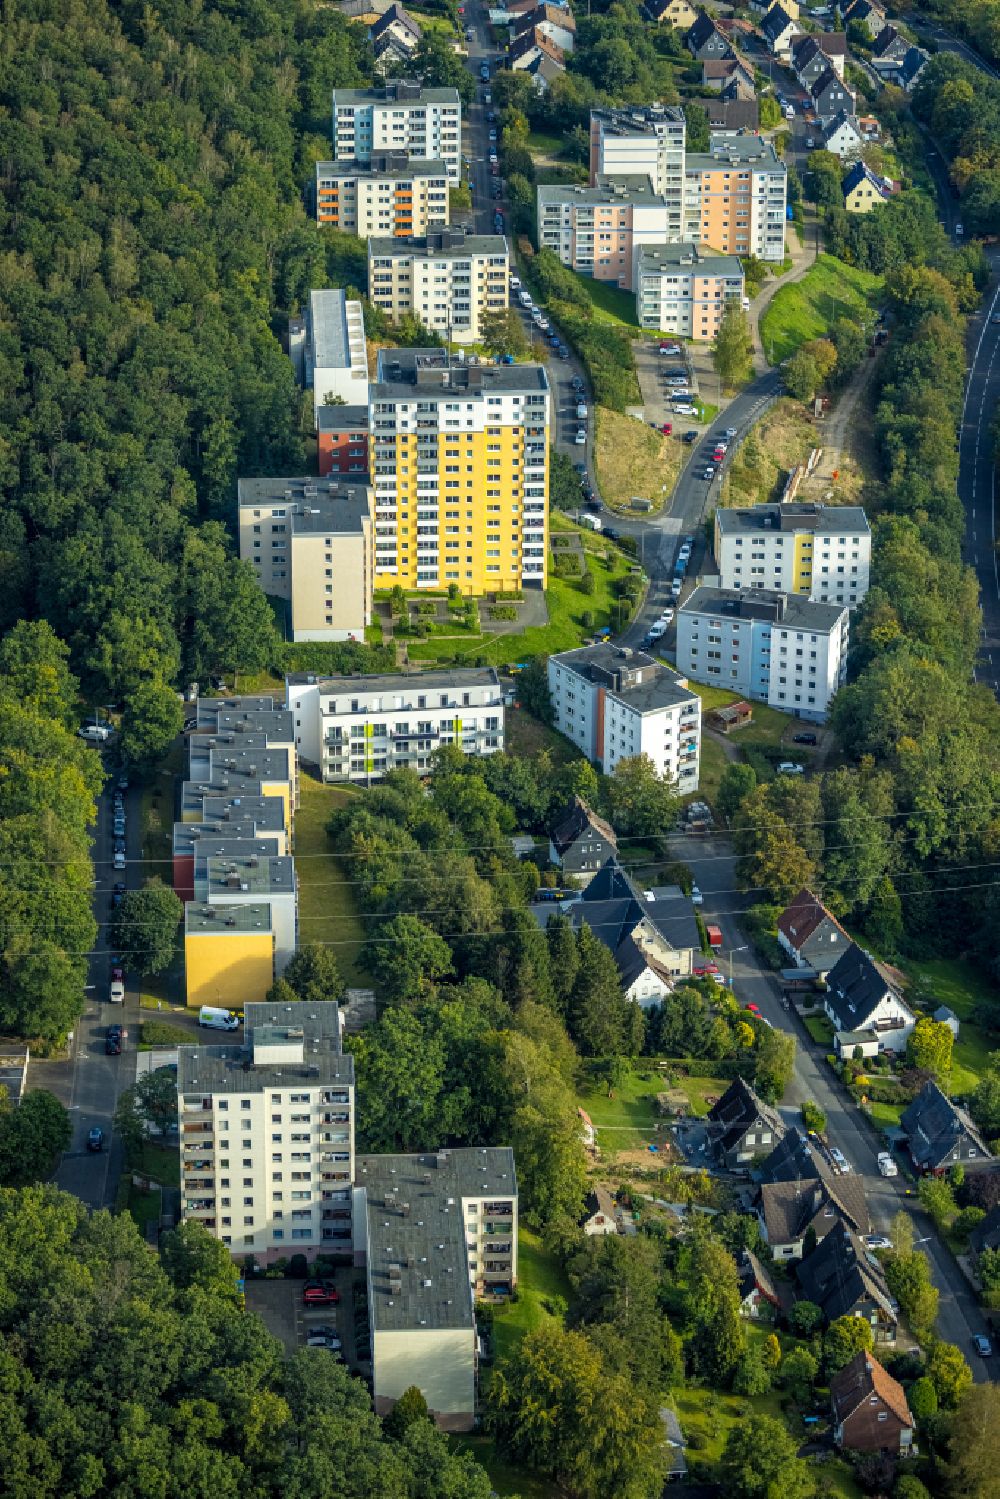 Birlenbach from above - Residential area of industrially manufactured settlement on street Wildweg in Birlenbach at Siegerland in the state North Rhine-Westphalia, Germany